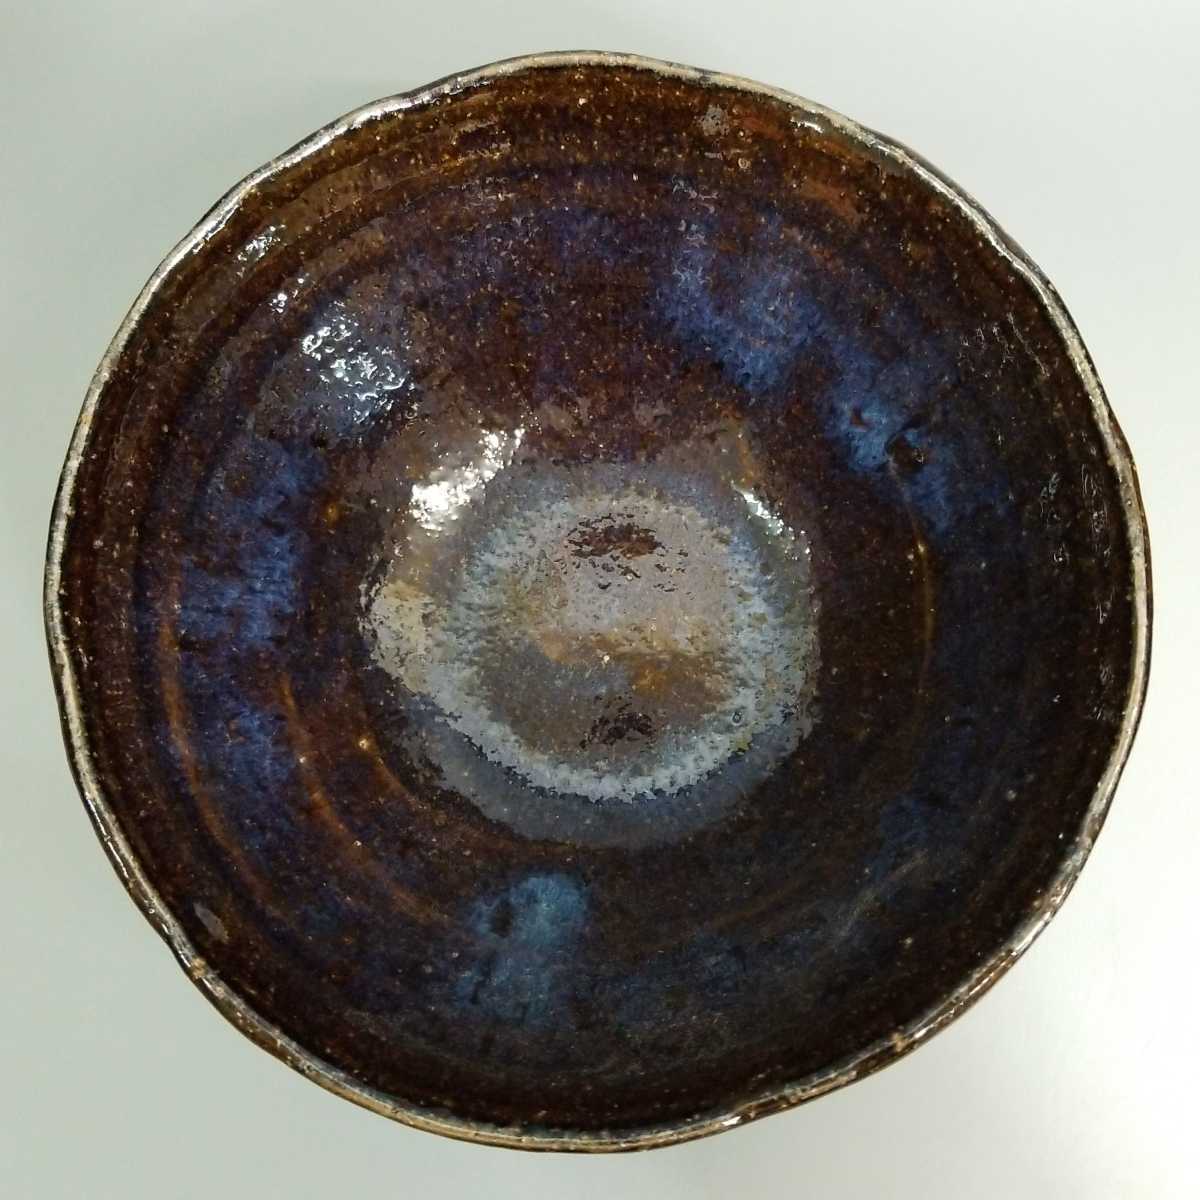  star 44) Hagi . mountain root Kiyoshi . blue Hagi deep pot large bowl salad bowl unused new goods including in a package welcome 